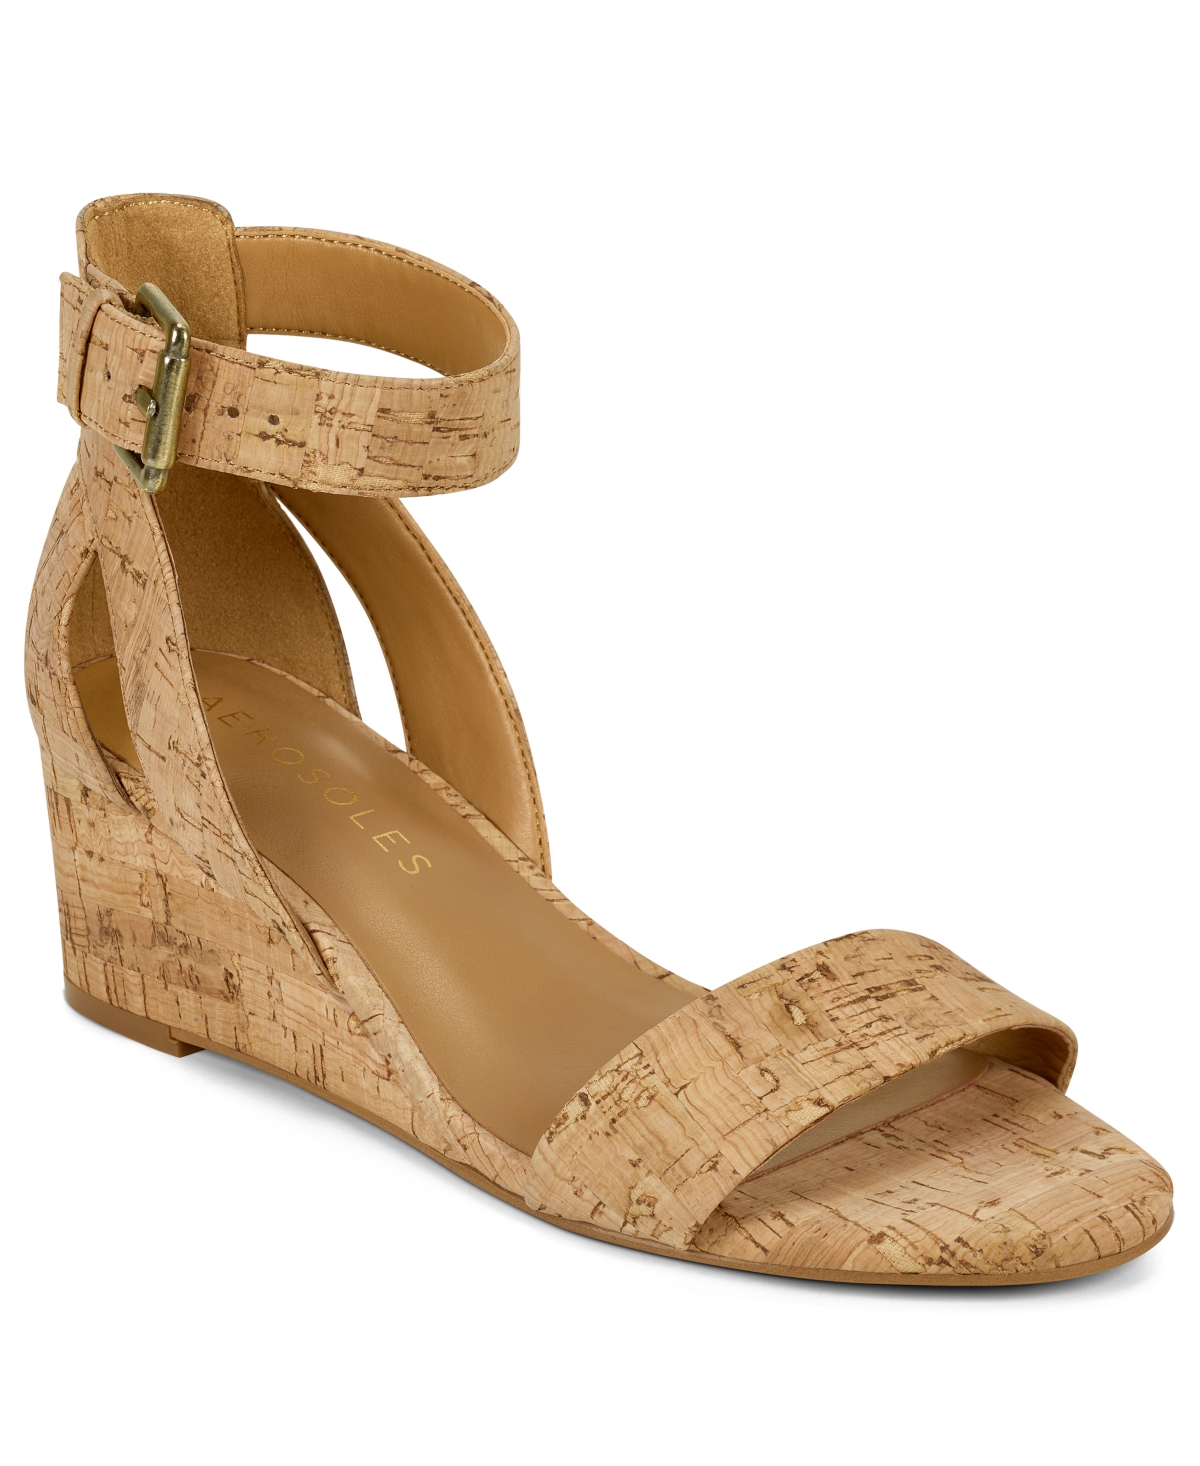 UPC 887039936216 product image for Aerosoles Willowbrook Wedge Sandals Women's Shoes | upcitemdb.com